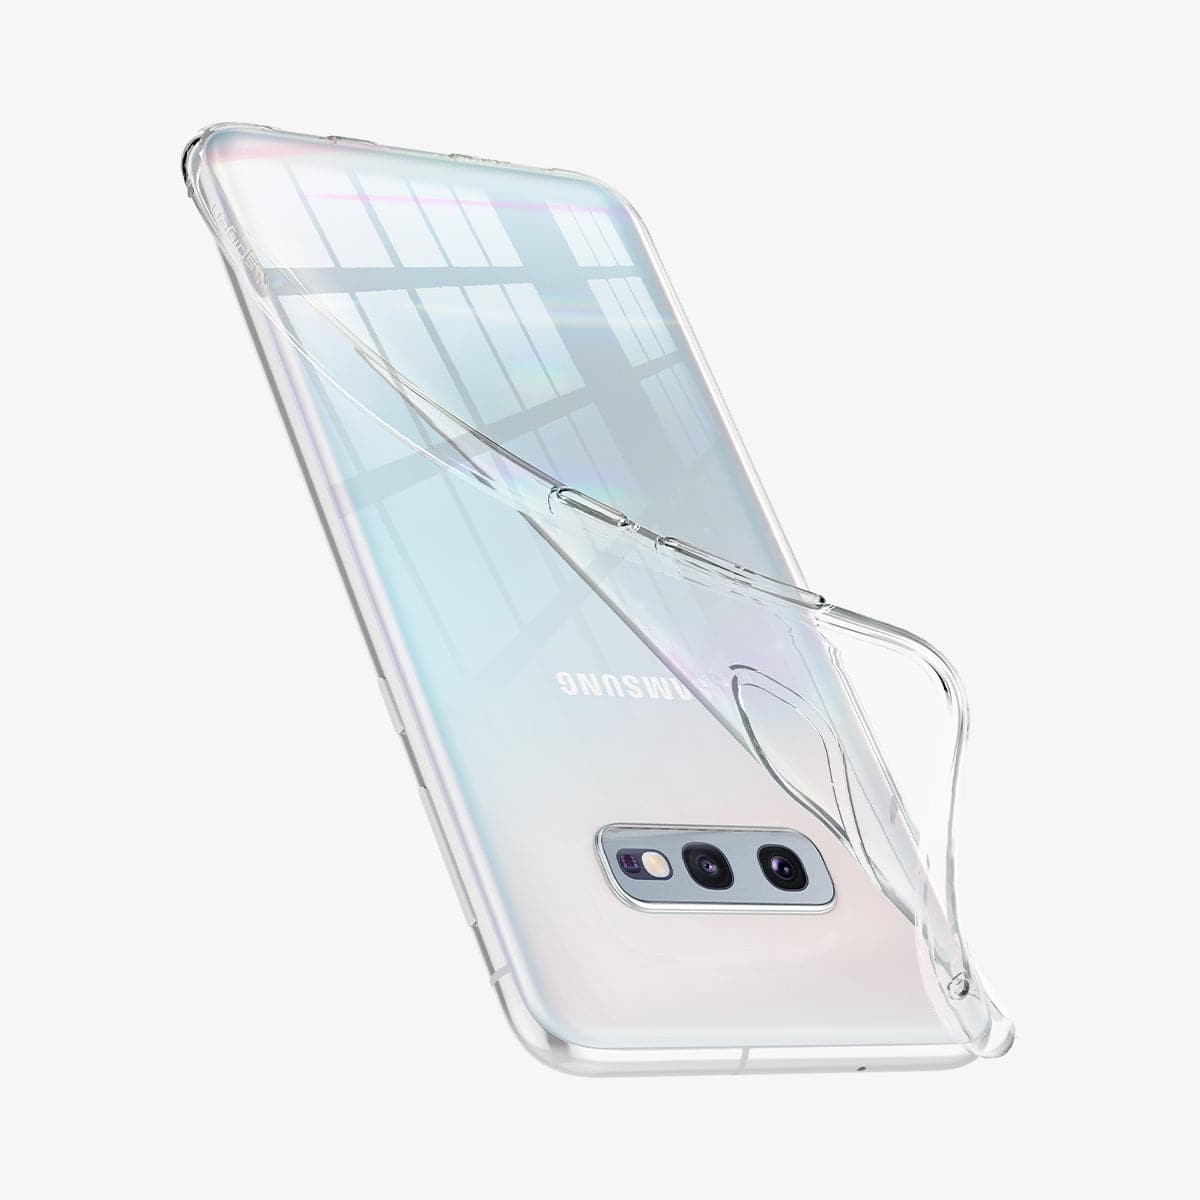 609CS25833 - Galaxy S10e Liquid Crystal Case in crystal clear showing the back and side with case bending away from the device